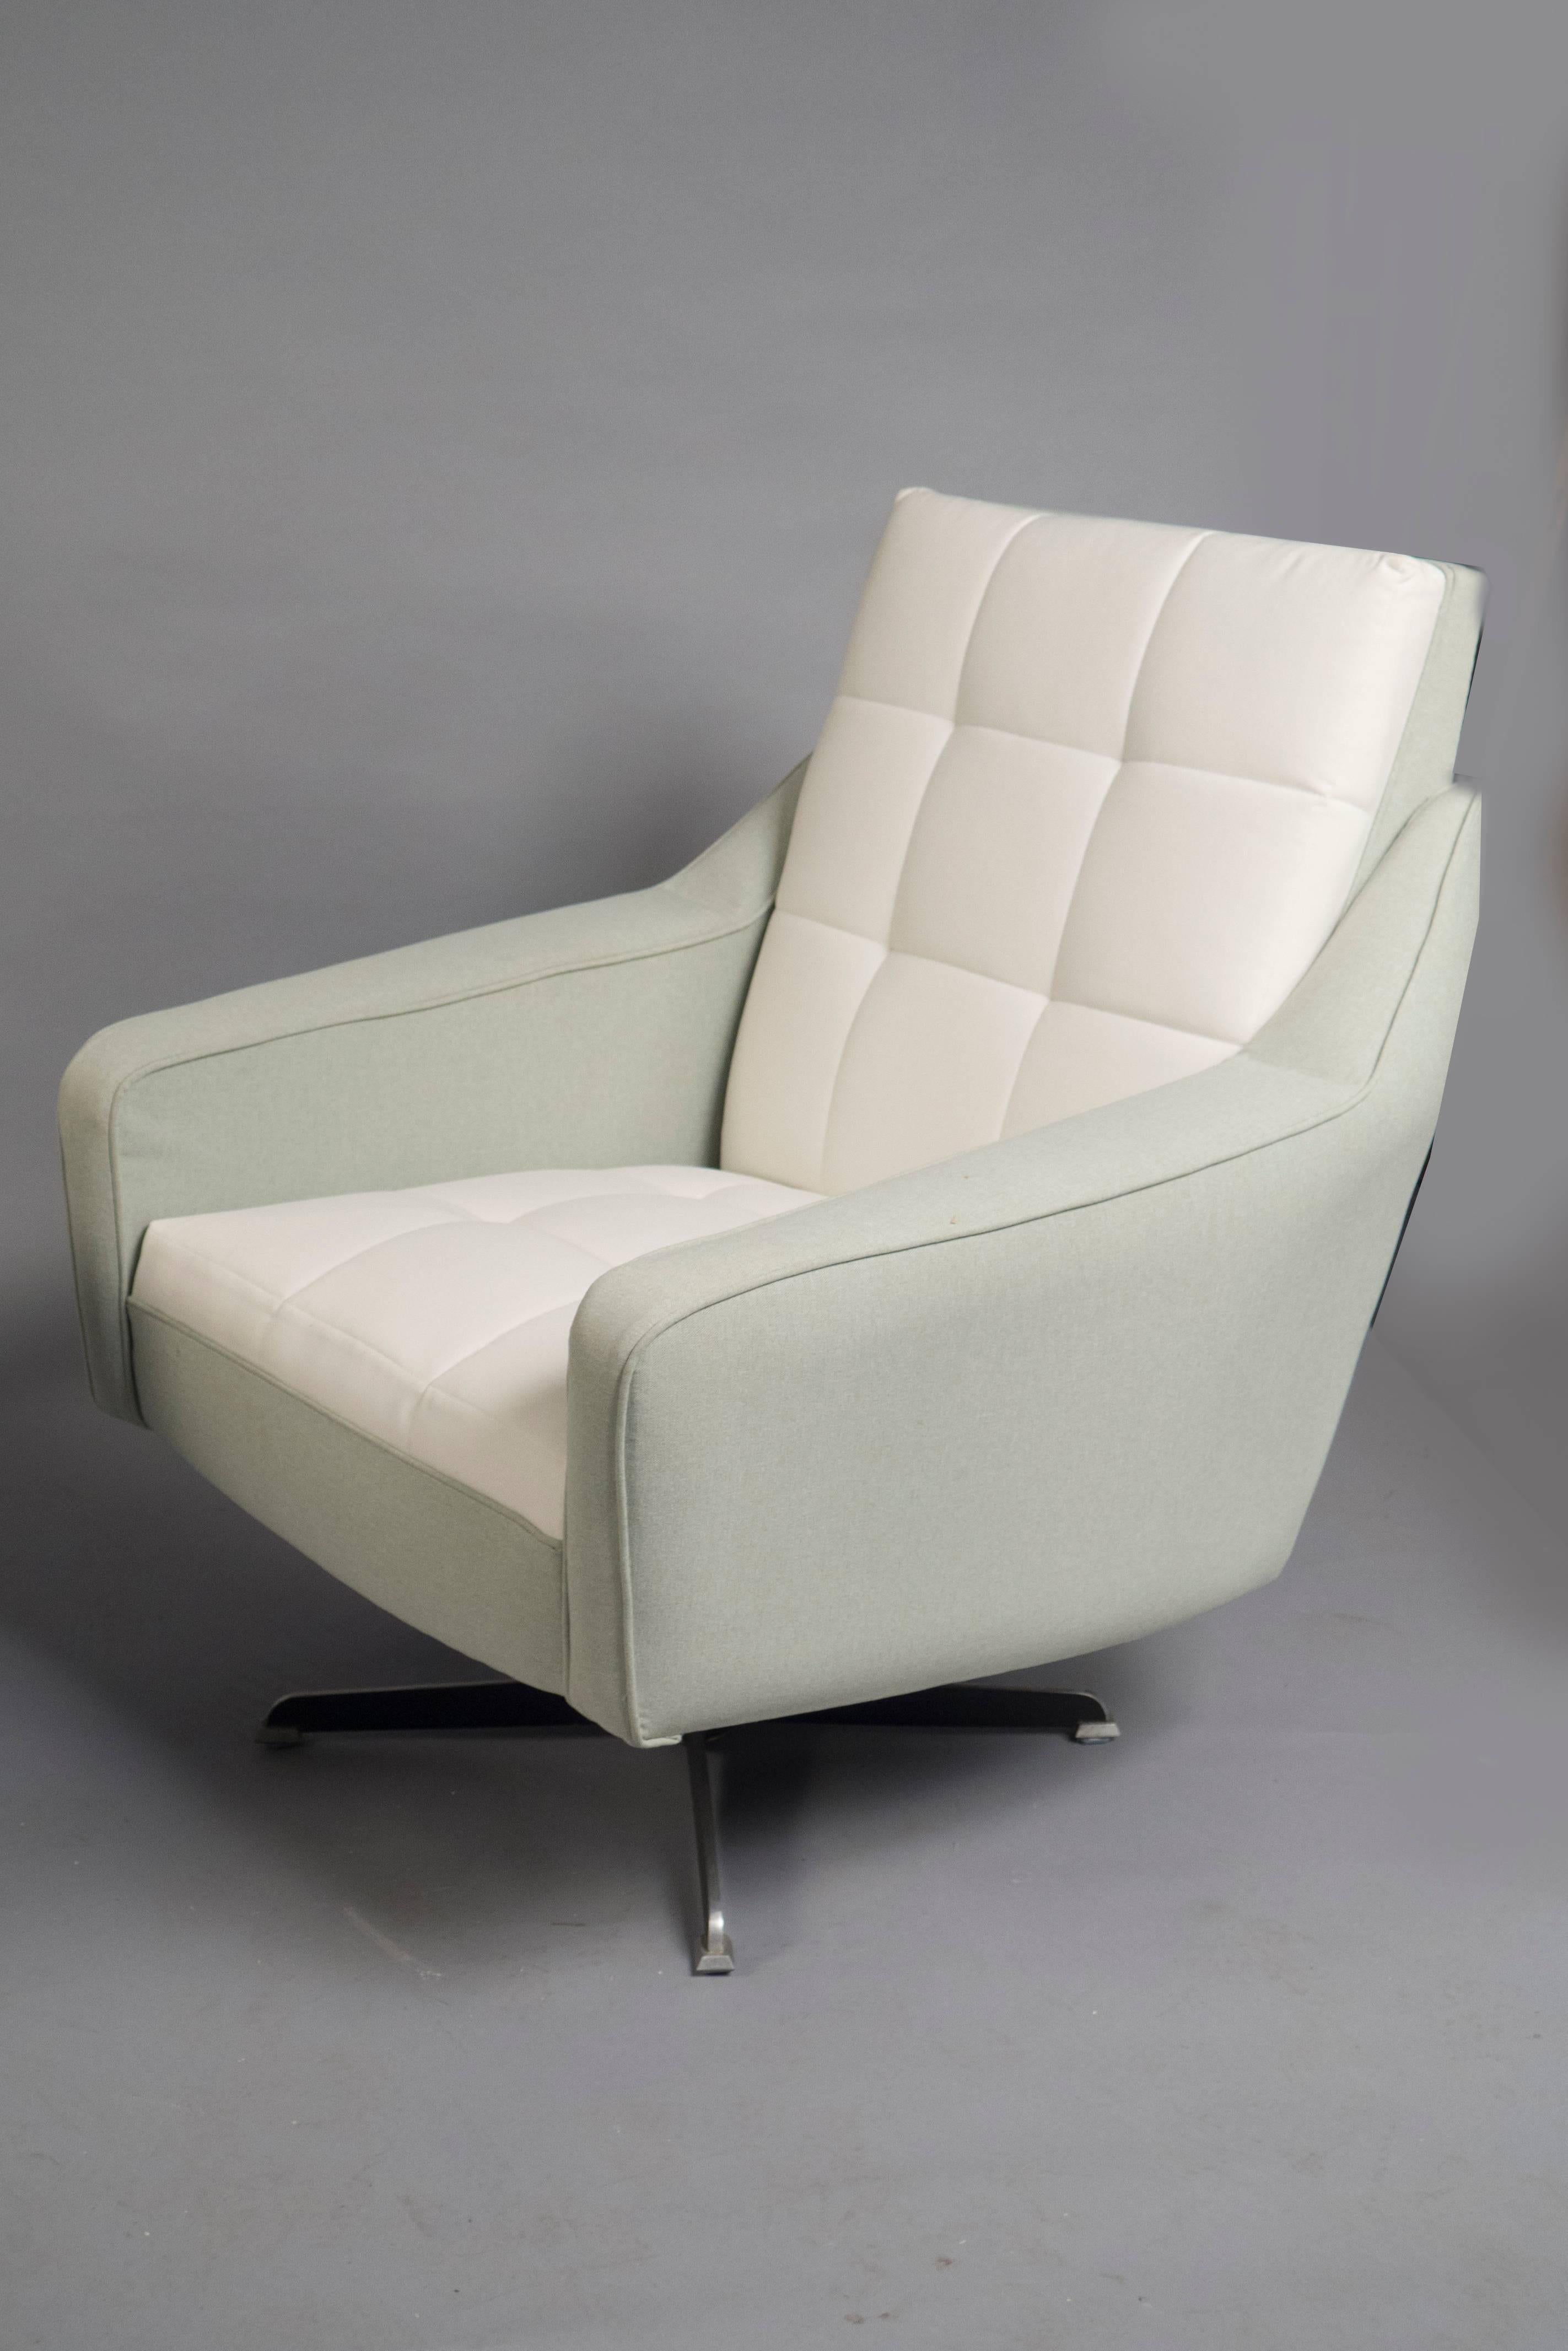 Over-upholstered pair of bergères, each featuring light pistachio colored backs and sides, the seat and back upholstered in white fabric.